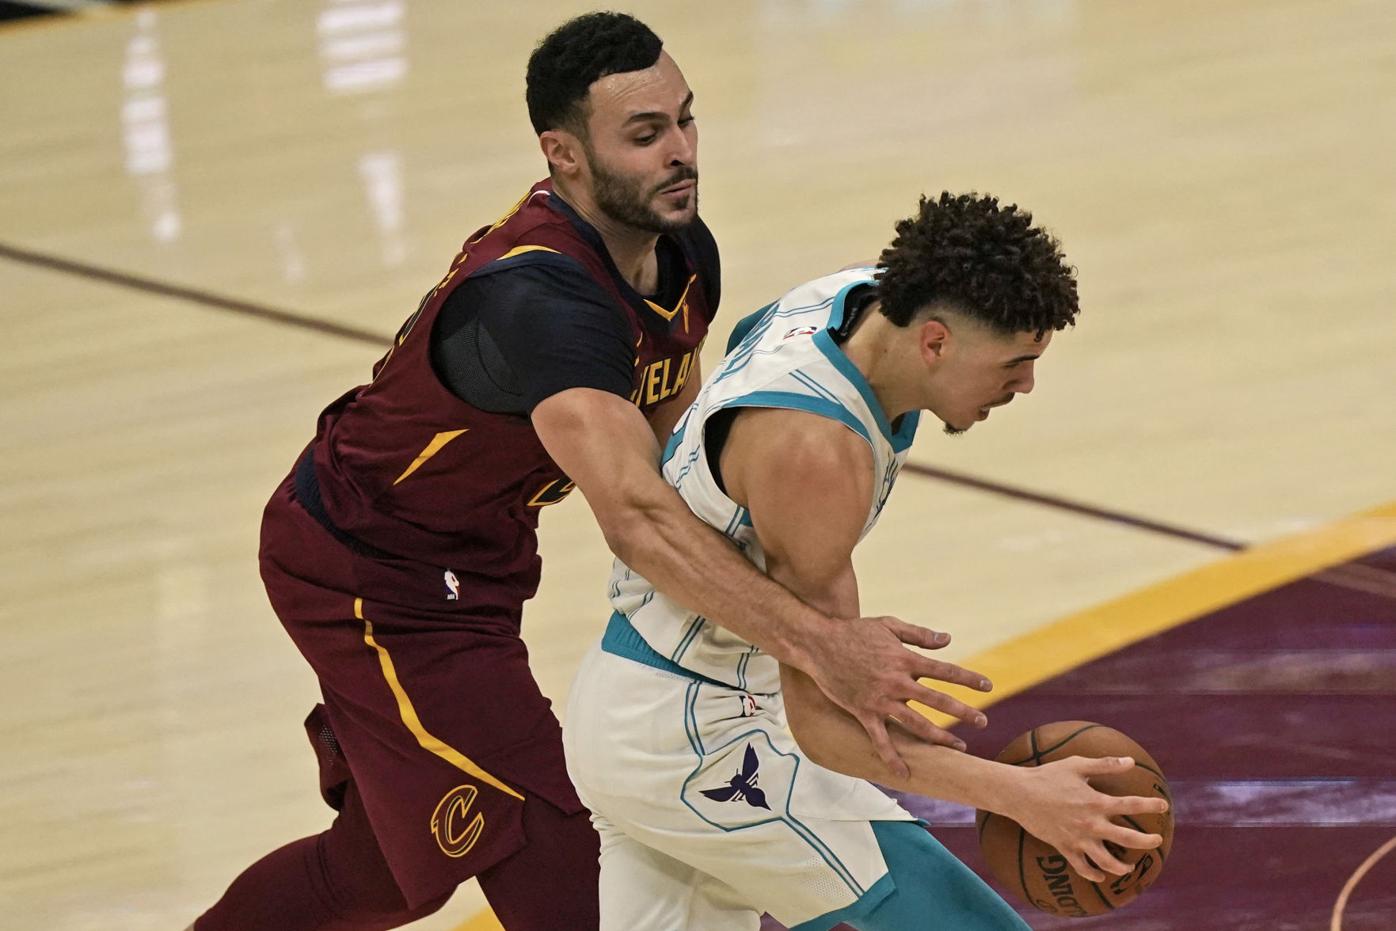 Larry Nance Jr. on being traded by Lakers, joining his hometown Cavs,  playing with LeBron and more